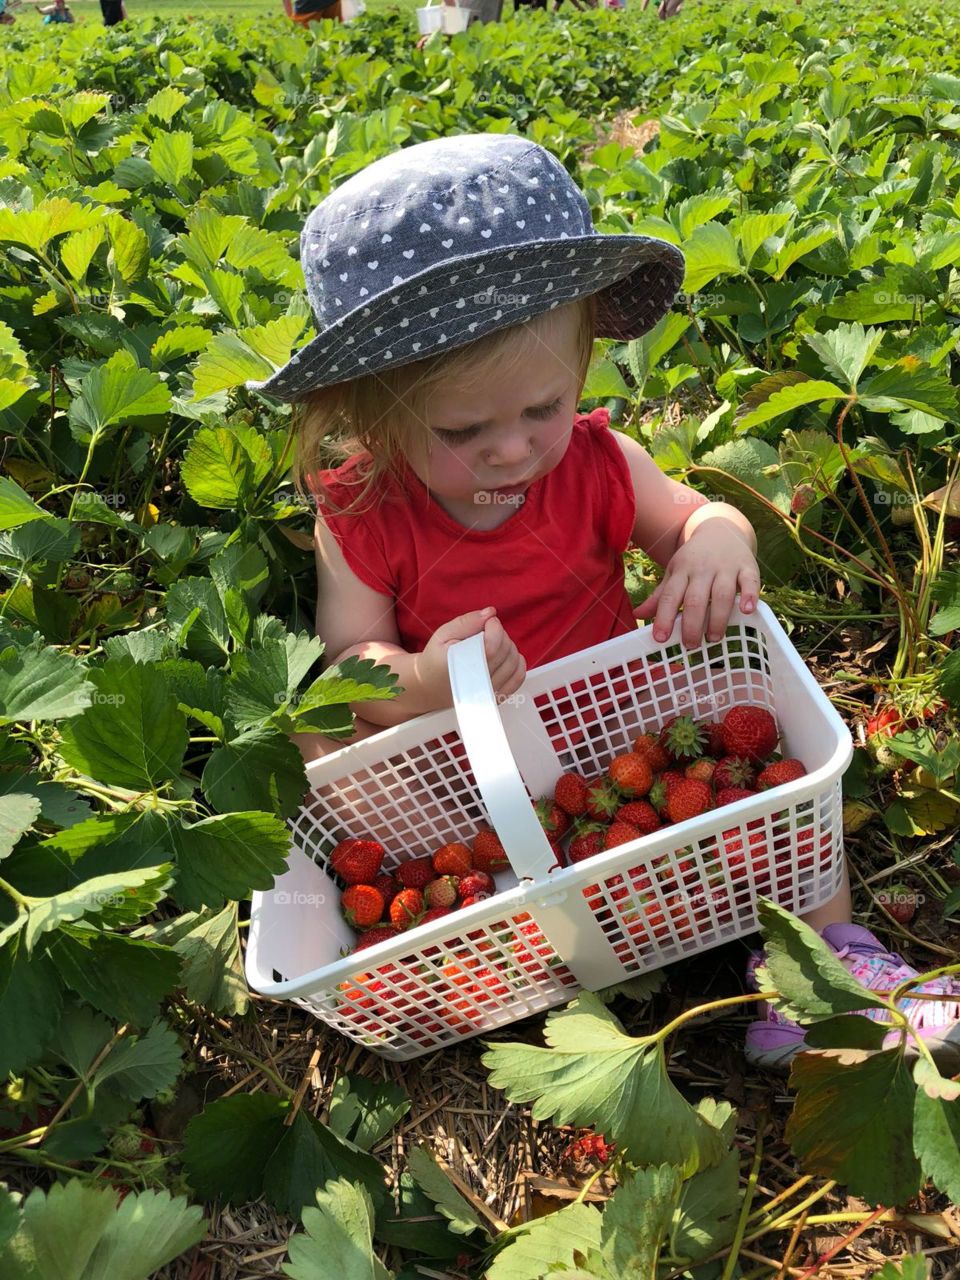 Toddler in a hat inspects her red strawberries in a white basket after a day of berry picking.